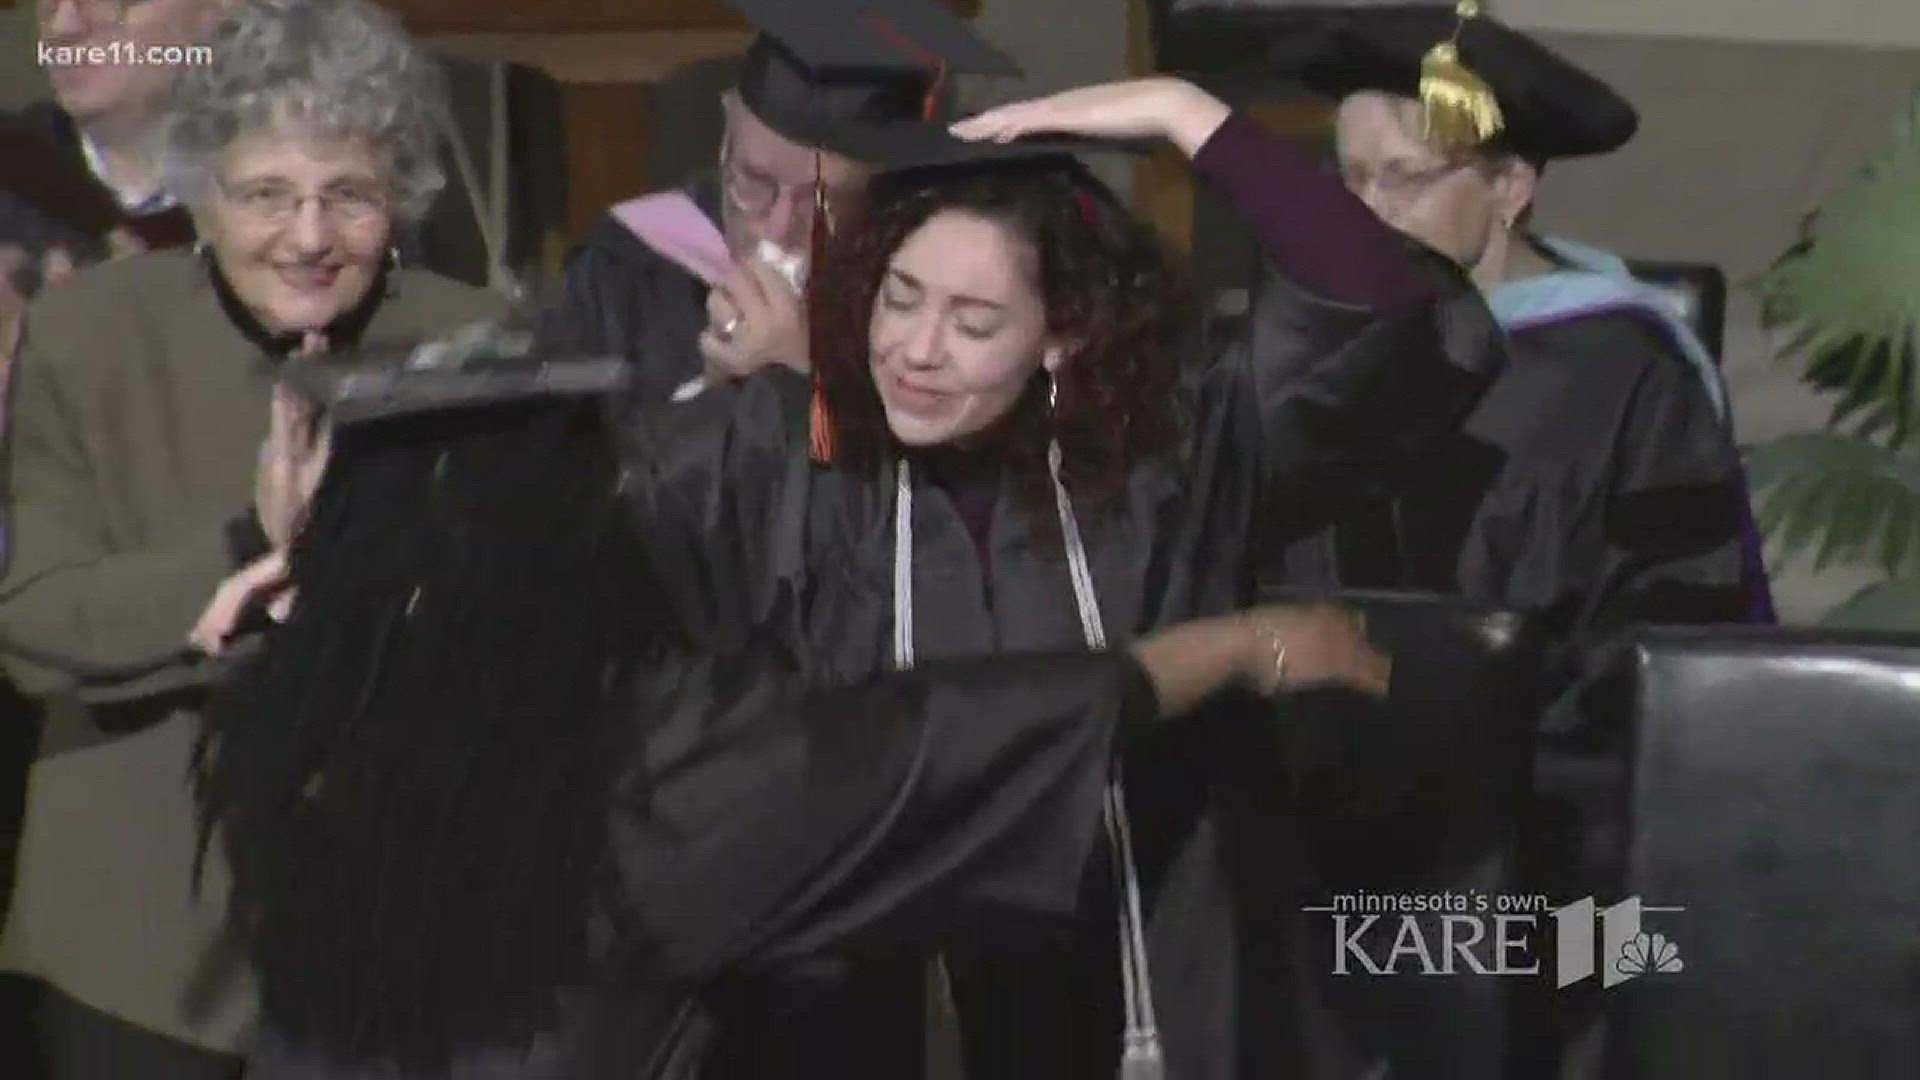 Less than 48 hours after the news of a sudden closure broke to students and staff, 38 students were set to graduate from McNally Smith College of Music. http://kare11.tv/2k4gLLr